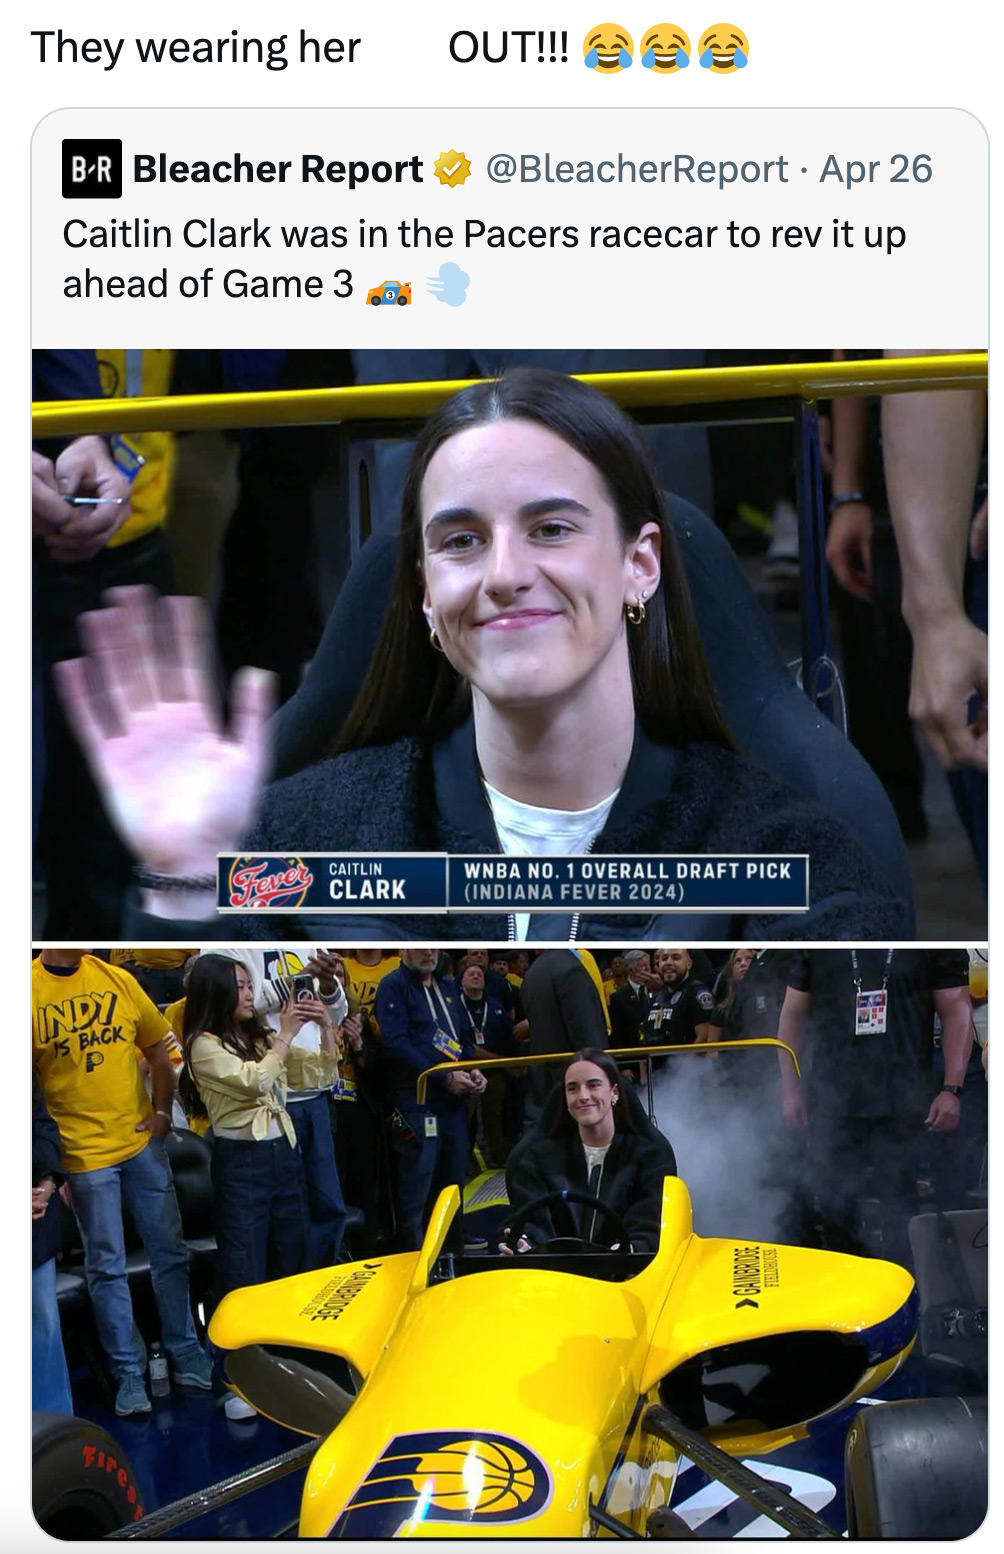 photo caption - Apr 26 . They wearing her Out!!! BR Bleacher Report Caitlin Clark was in the Pacers racecar to rev it up ahead of Game 3 Indy Is Back P Fever Fires Caitlin Clark Wnba No. 1 Overall Draft Pick Indiana Fever 2024 Gambridge Gainbridge Dohotel